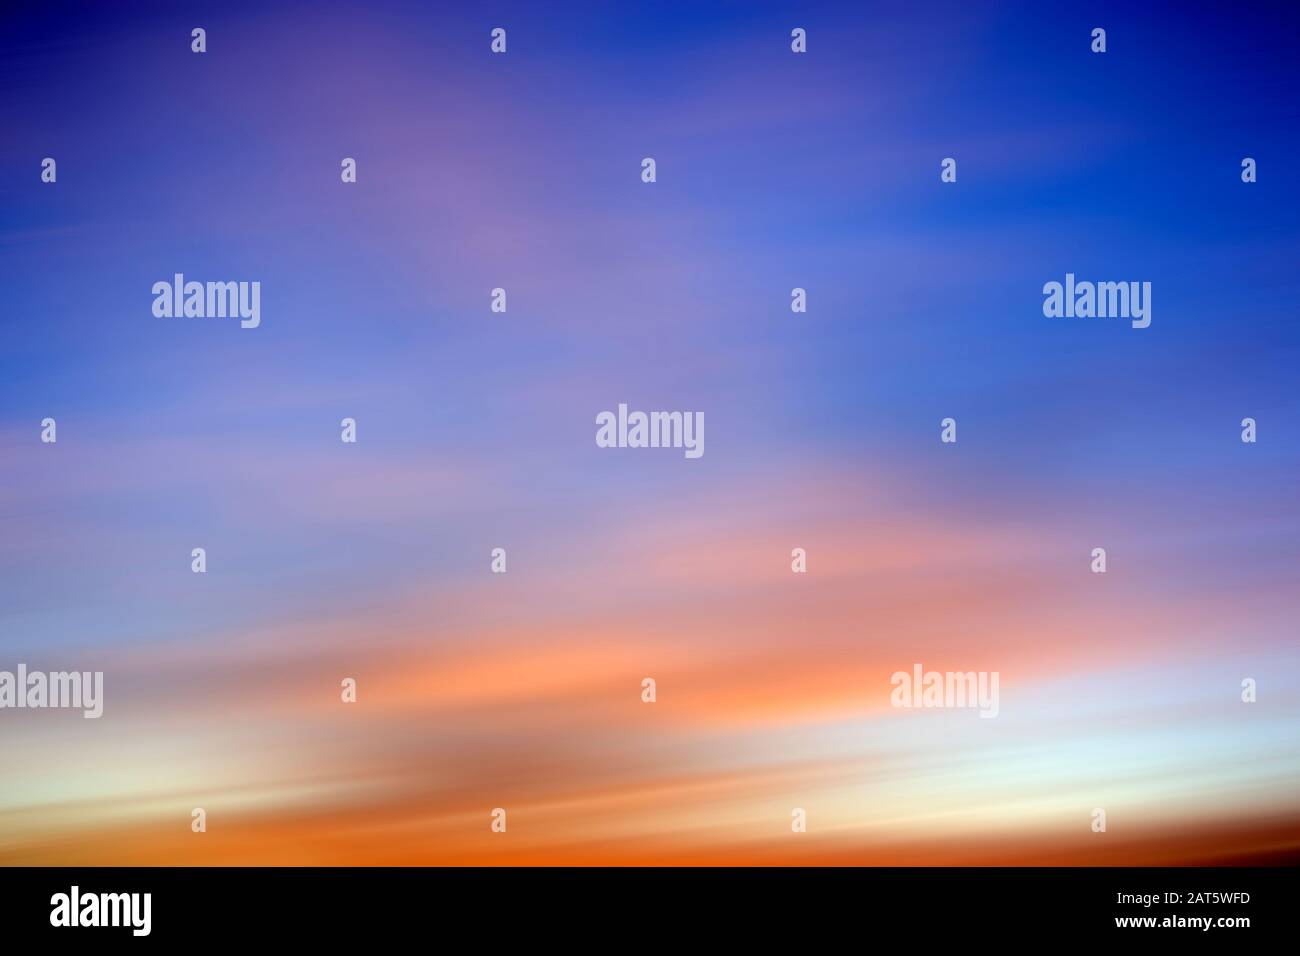 Abstract blurred Background of Beautiful, colorful sunset clouds against the perfect blue sky Stock Photo